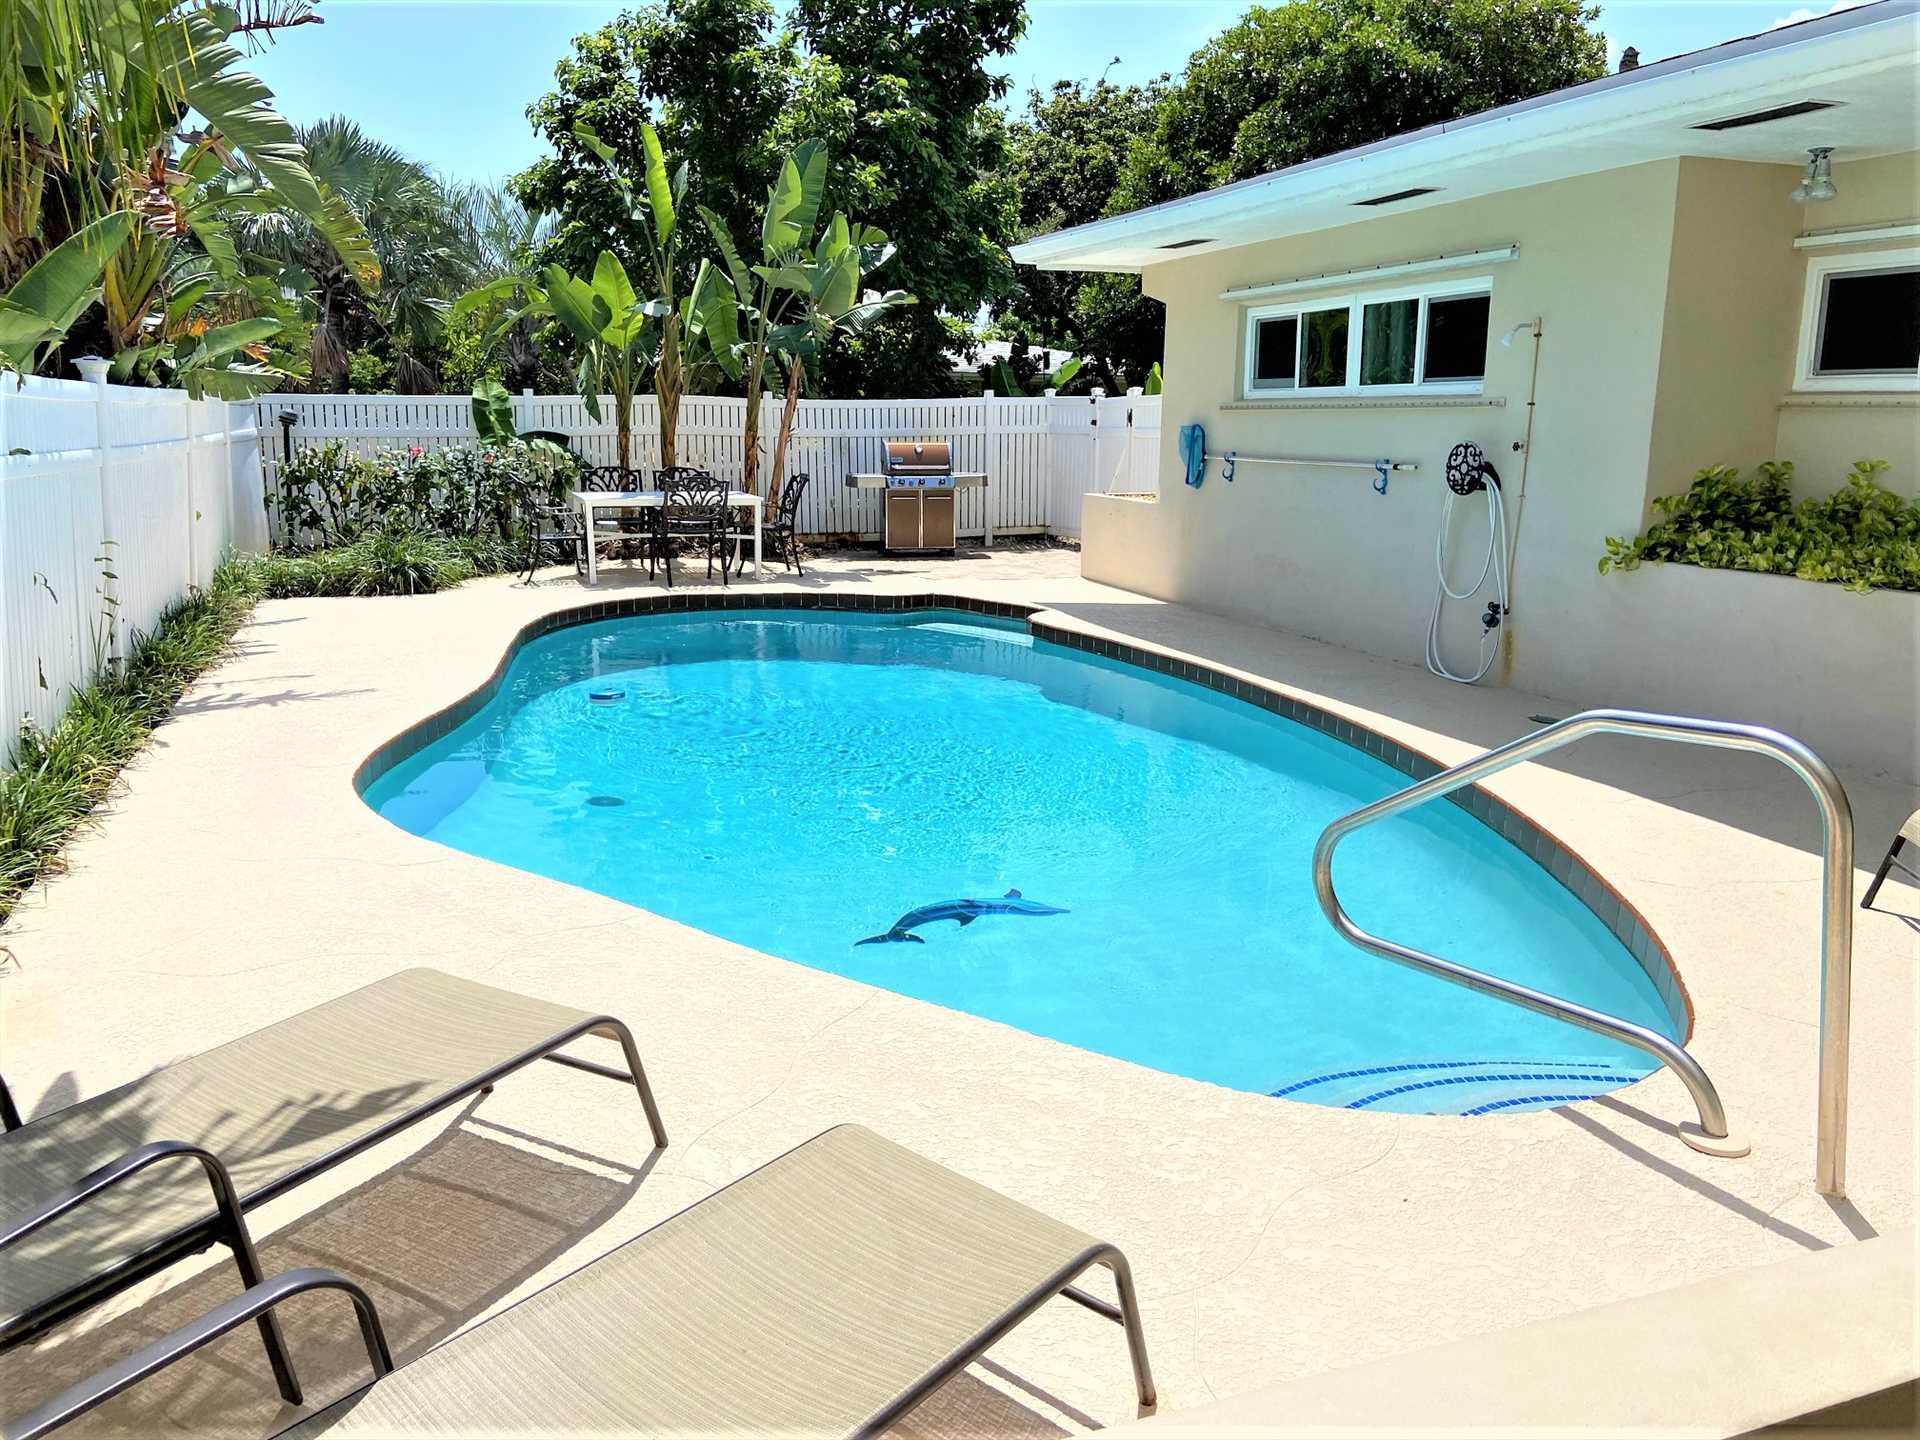 Gorgeous free form pool is perfect for family fun in the Flo